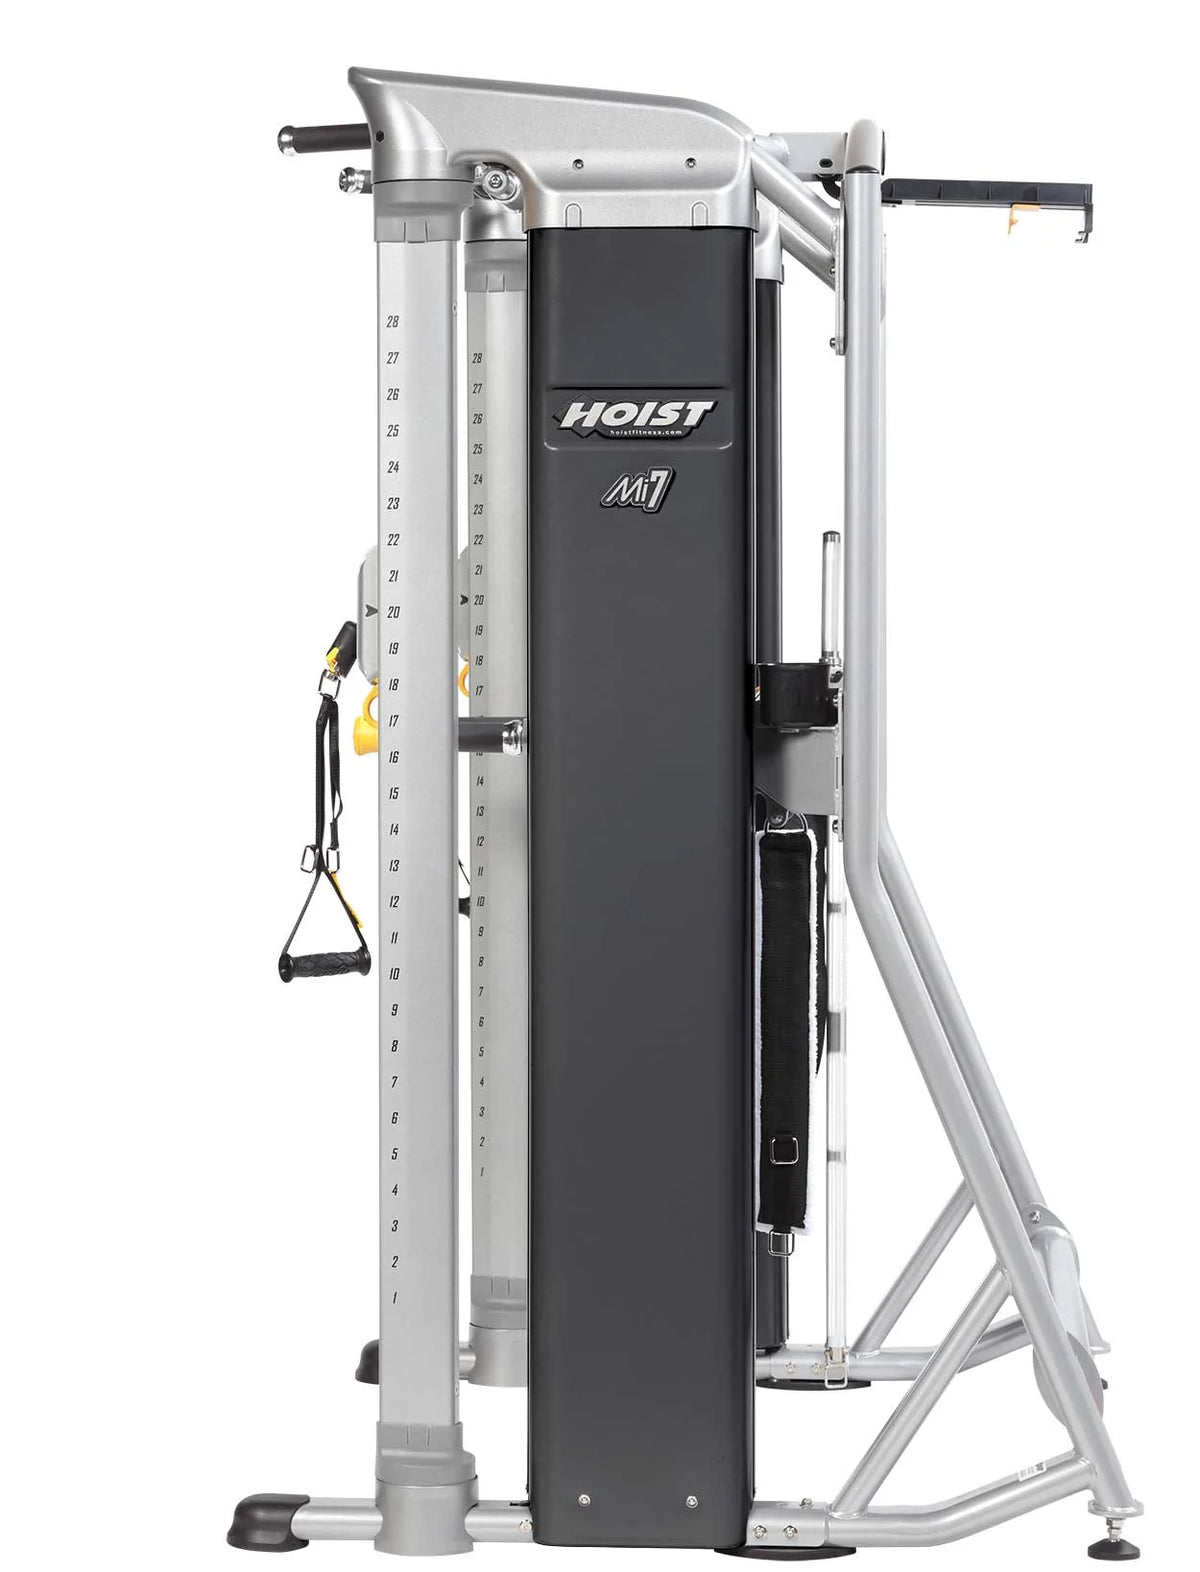 Hoist Fitness Mi7 Functional Training System side view | Fitness Experience 